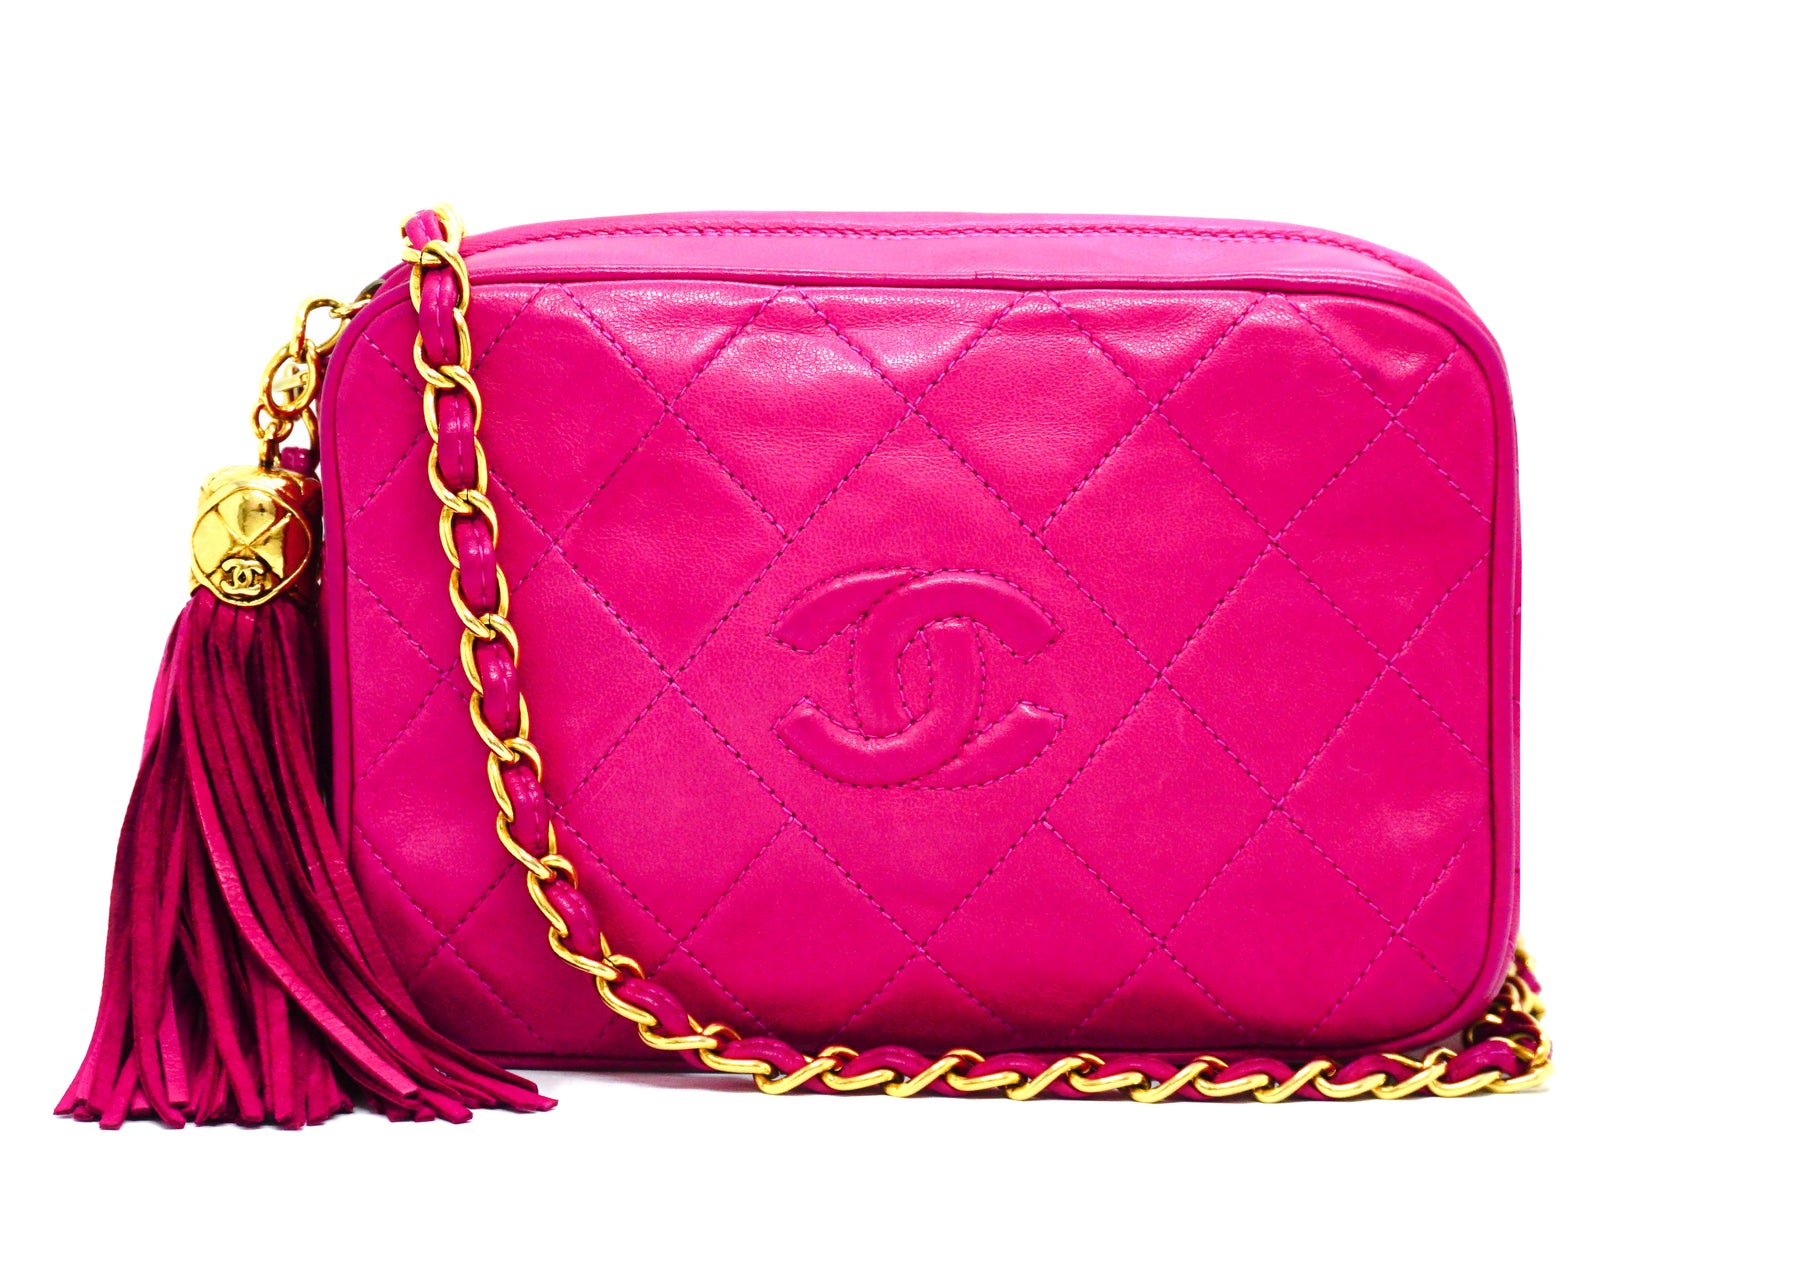 SOLD) genuine pre-owned Chanel coco sailor camera bag – Deluxe Life  Collection